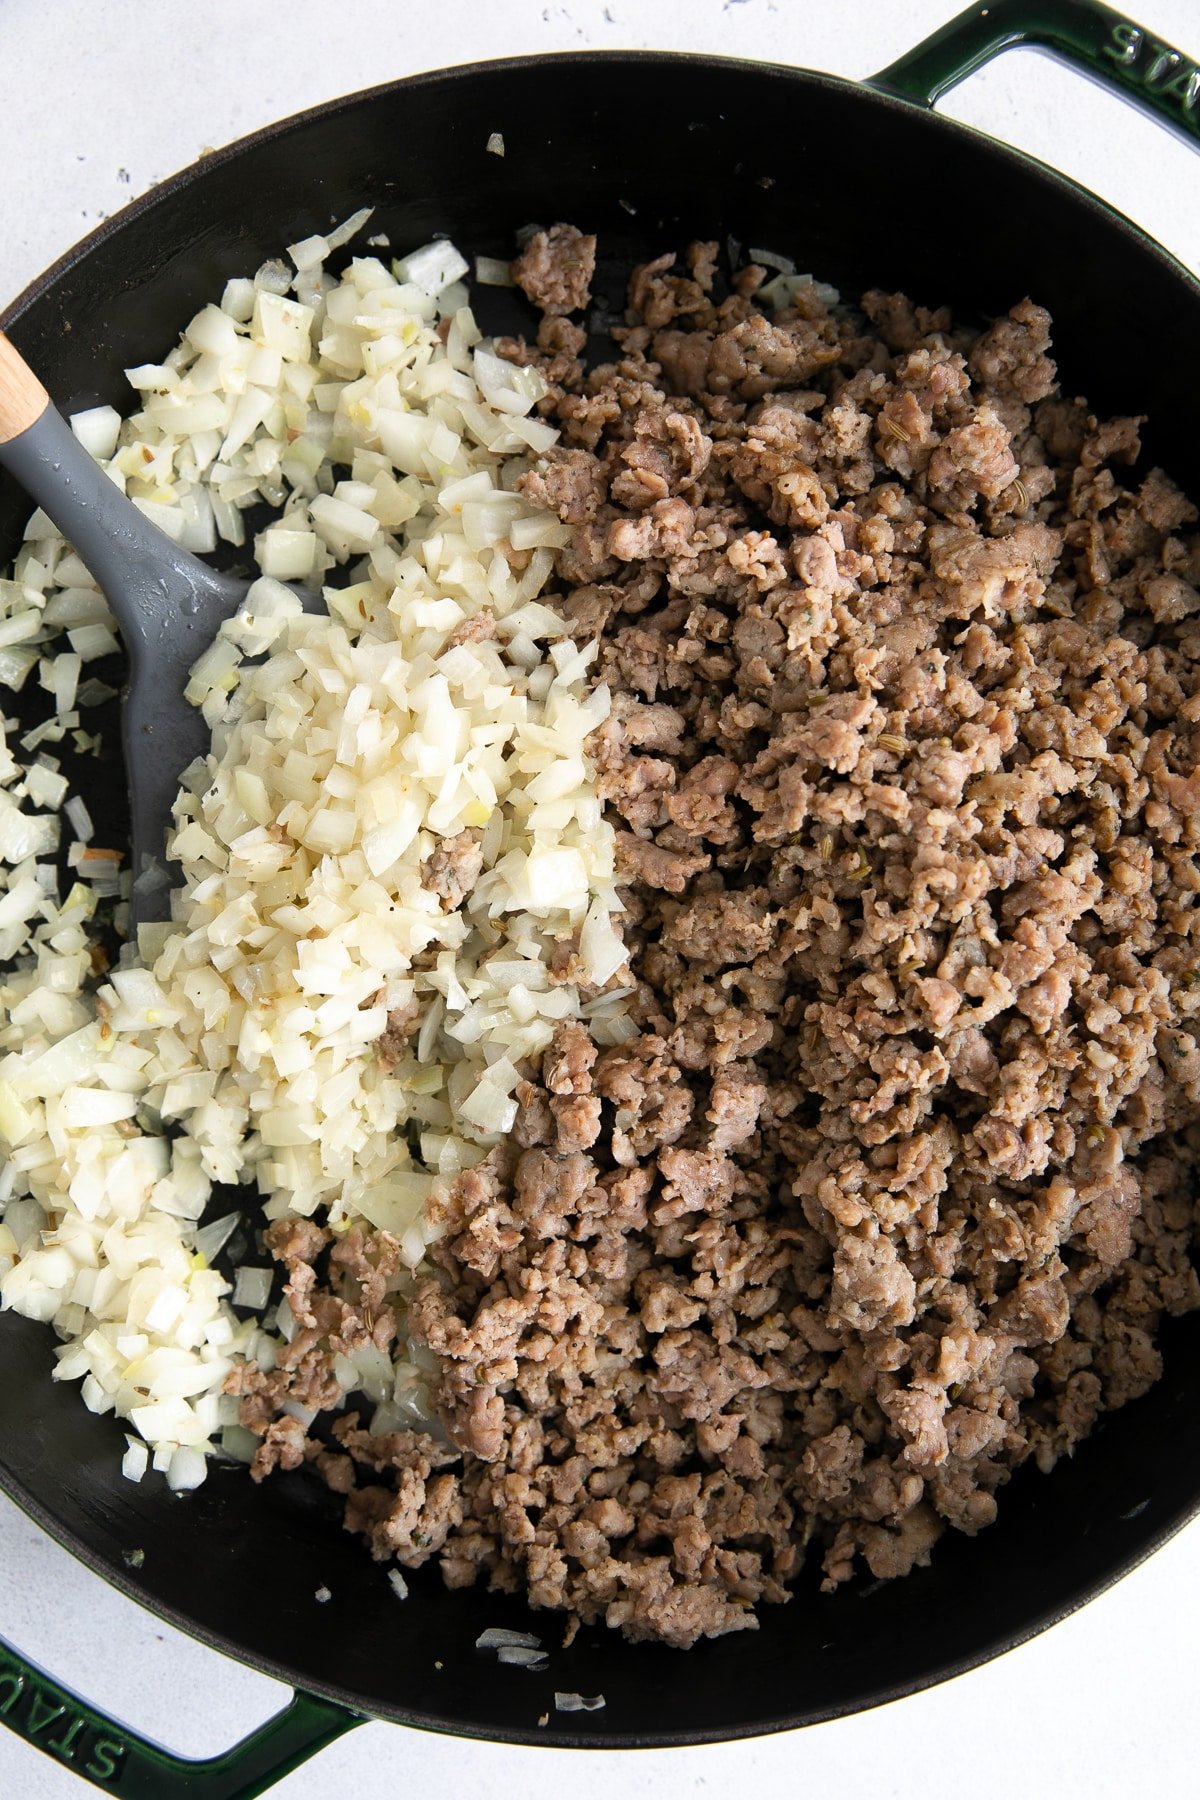 Combining softened onions and garlic with browned cooked Italian sausage crumbles.